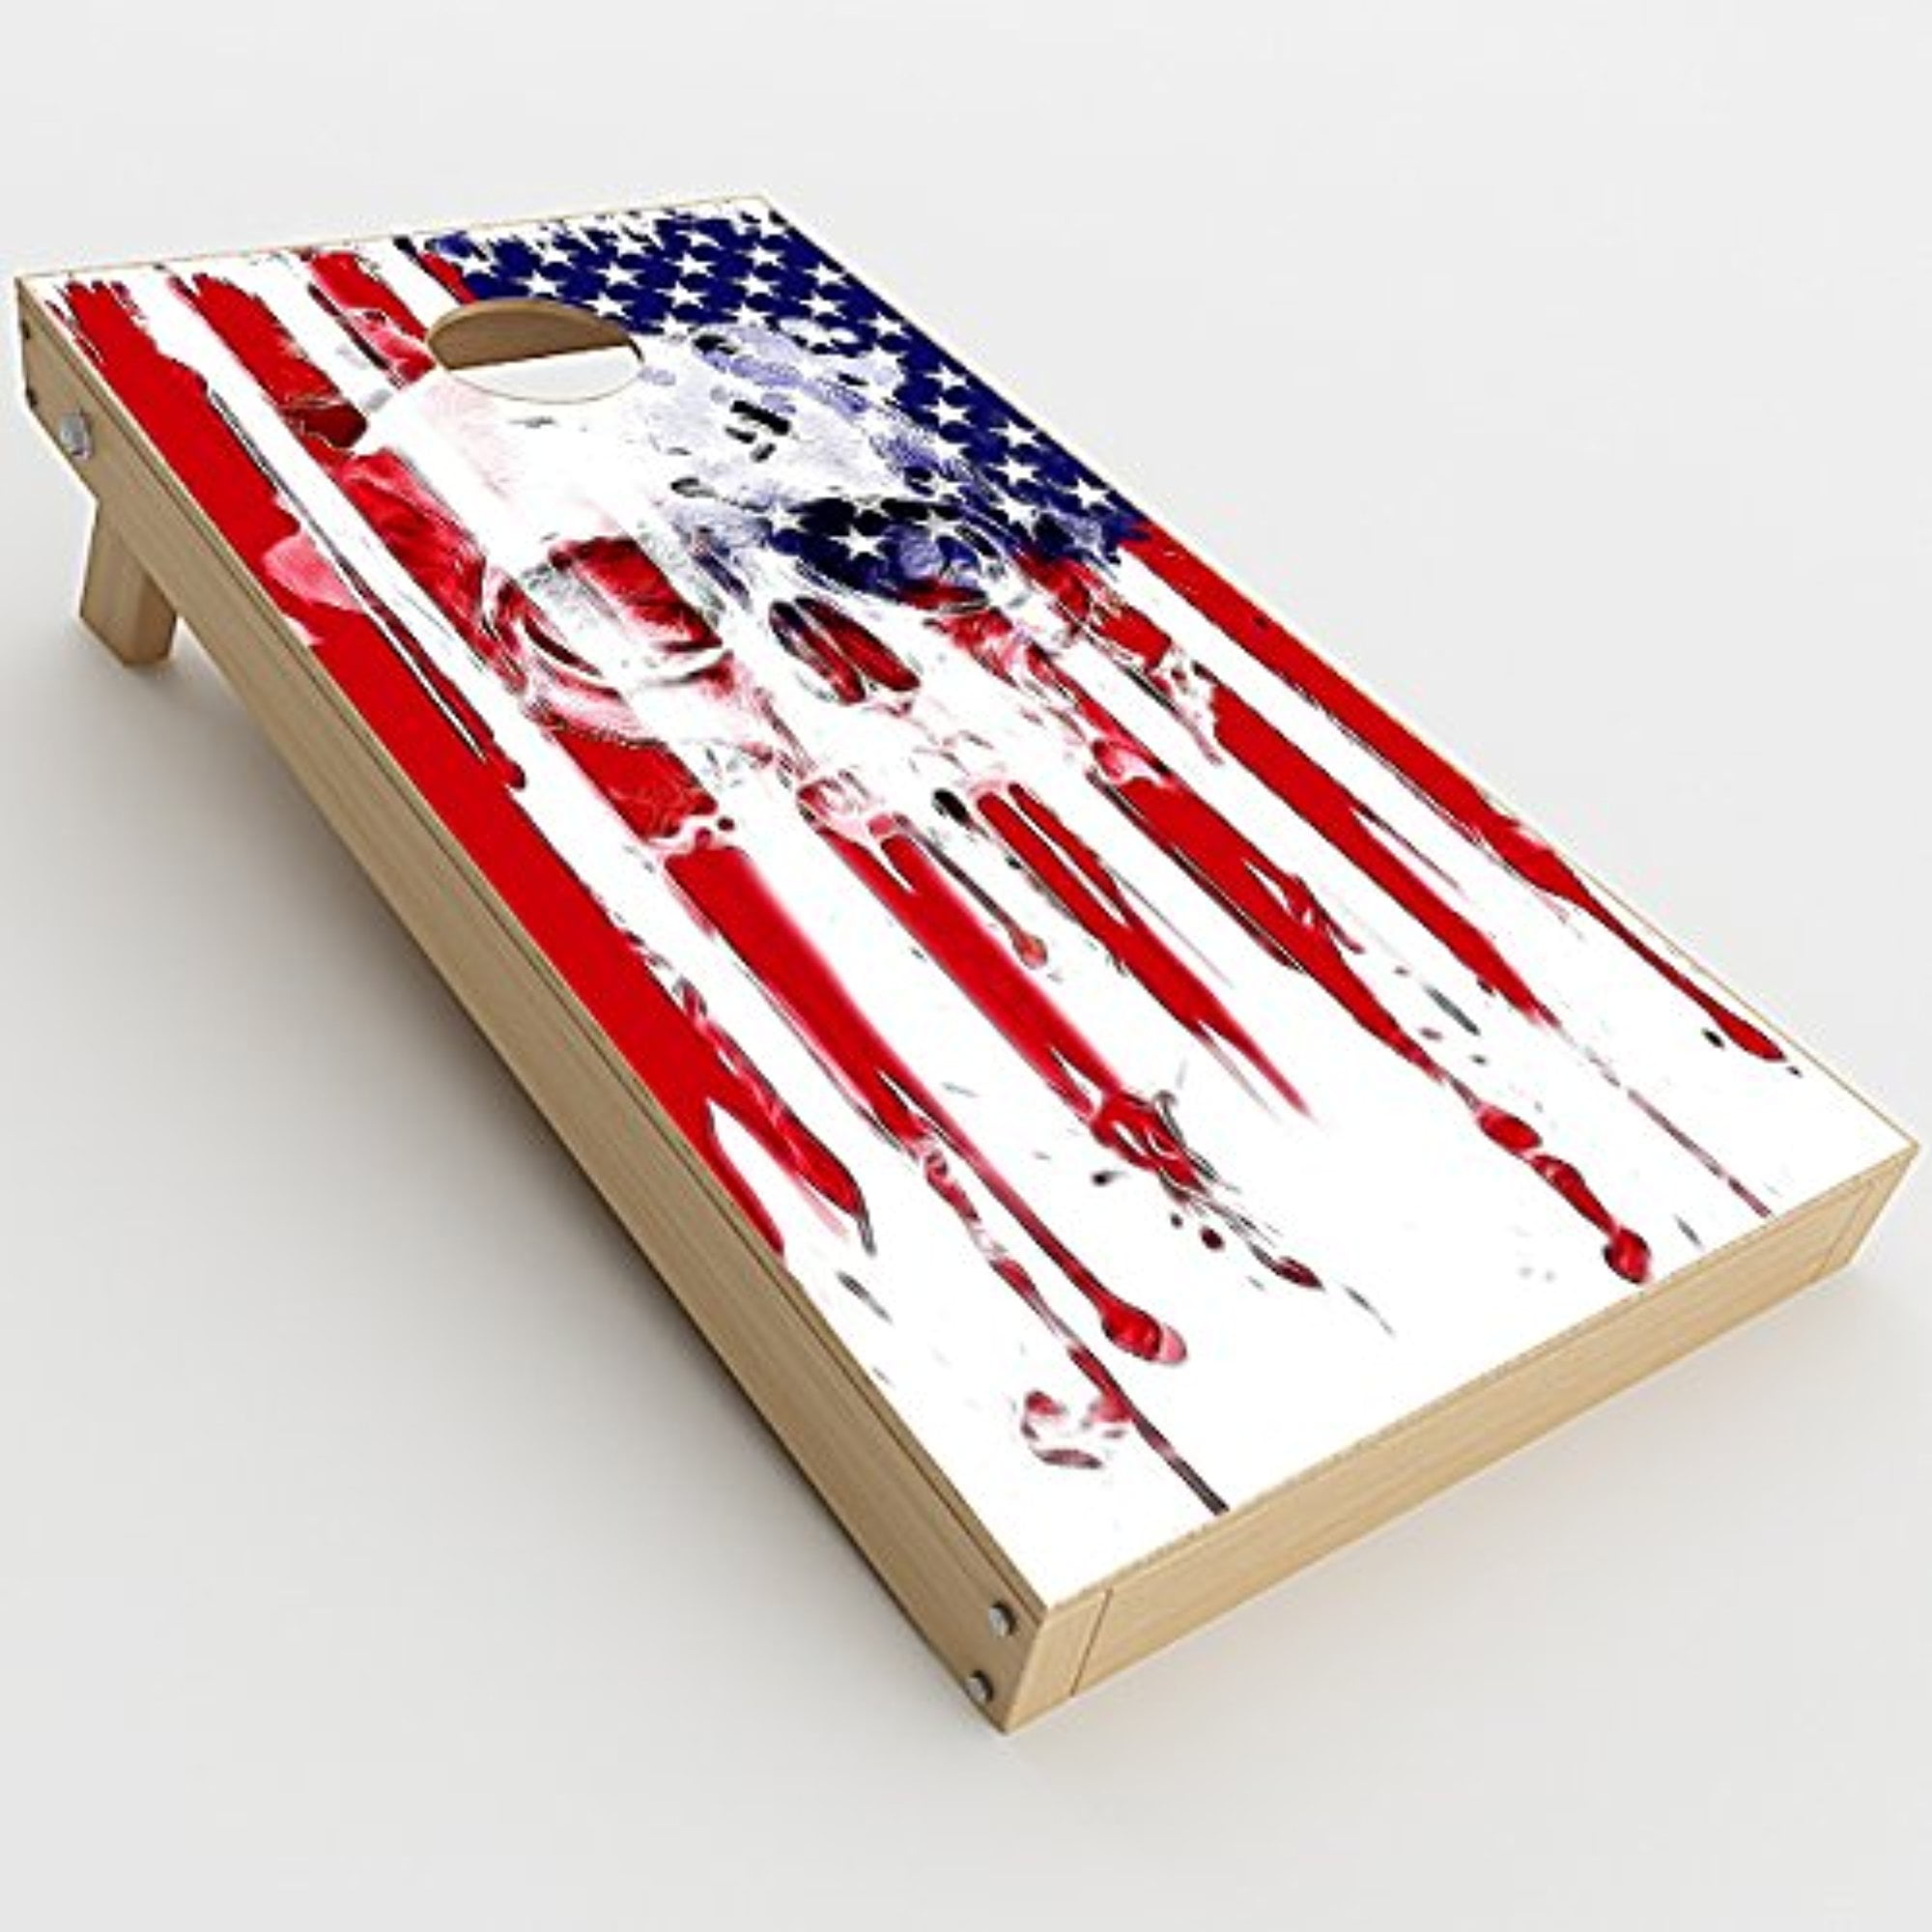 Skin Decal Vinyl Wrap for Cornhole Outdoor Board Game Bag Toss / American Flag distressed itsaskin1 2 x Pcs. skins only